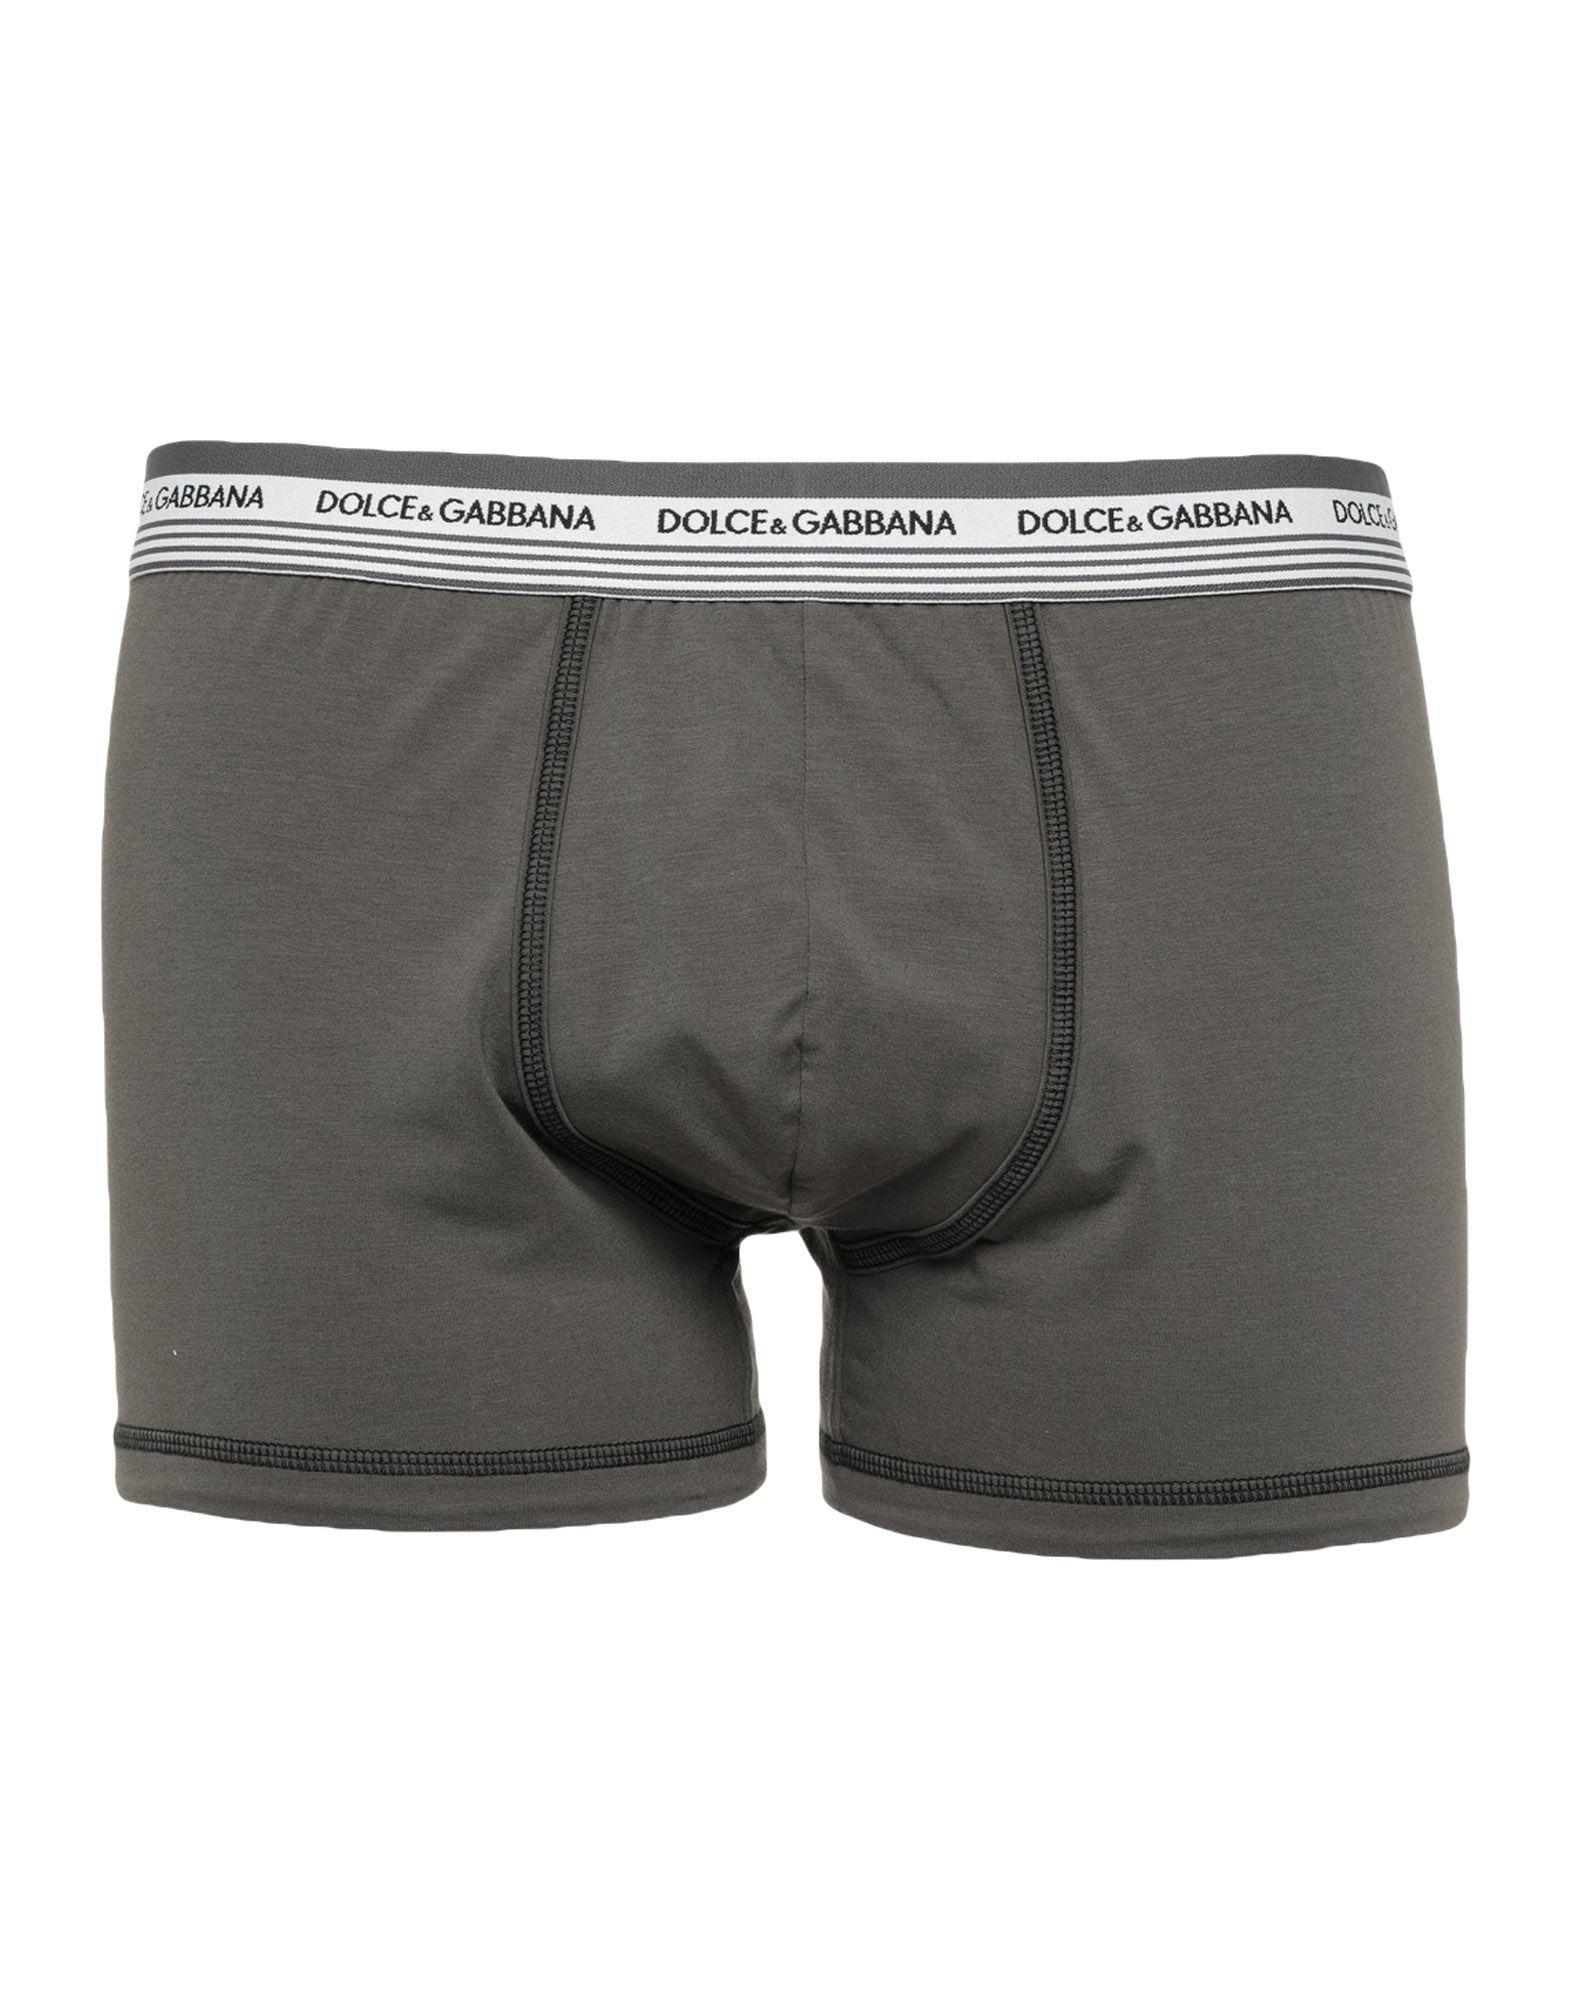 Dolce & Gabbana Cotton Boxer in Lead (Gray) for Men - Lyst